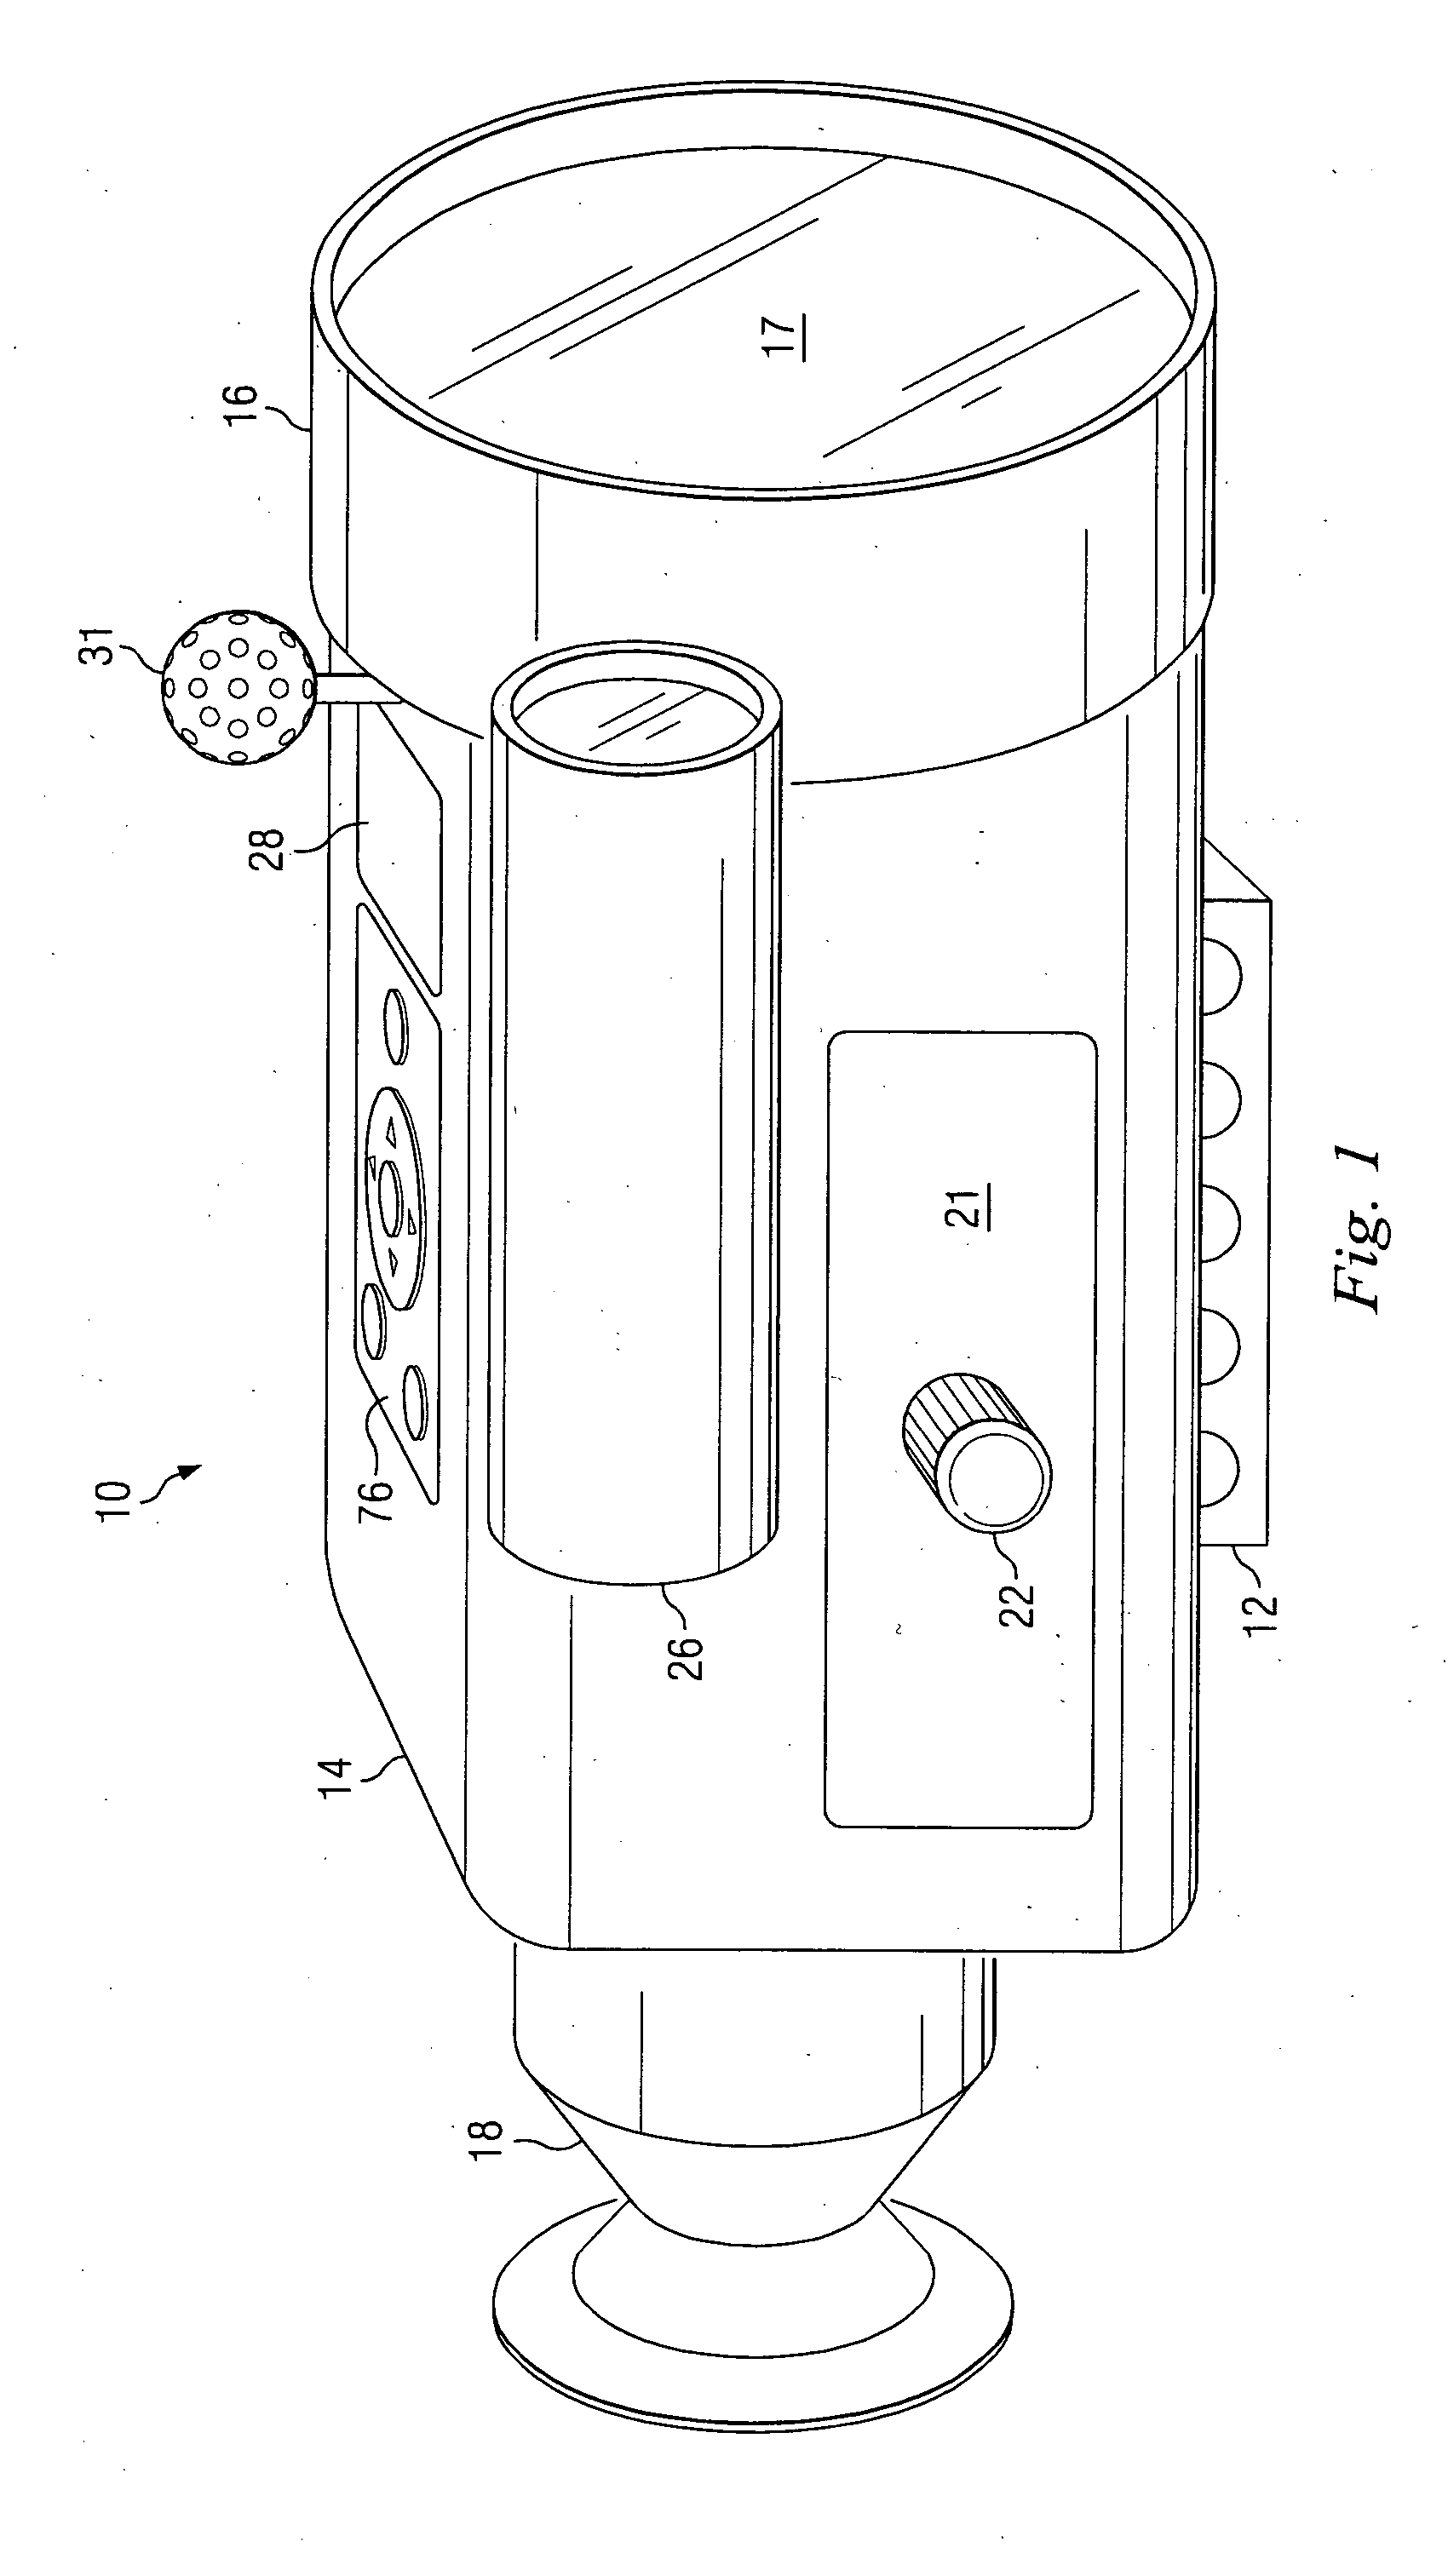 Electronic sight for firearm, and method of operating same